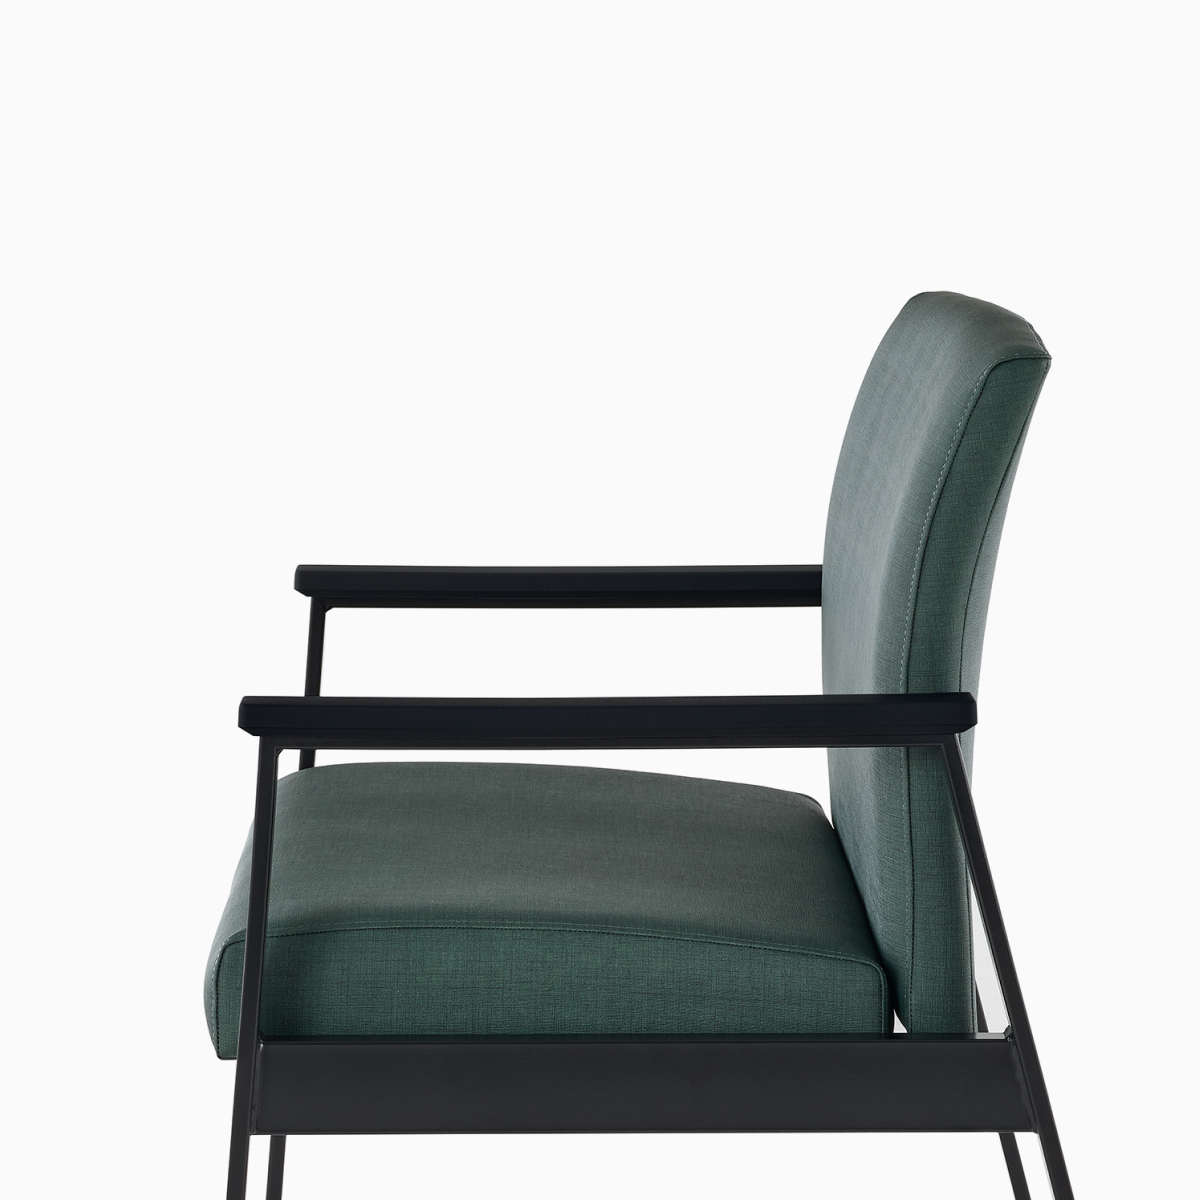 Side view of an Easton Plus Chair with green upholstery, black four-leg base, and black arm caps.